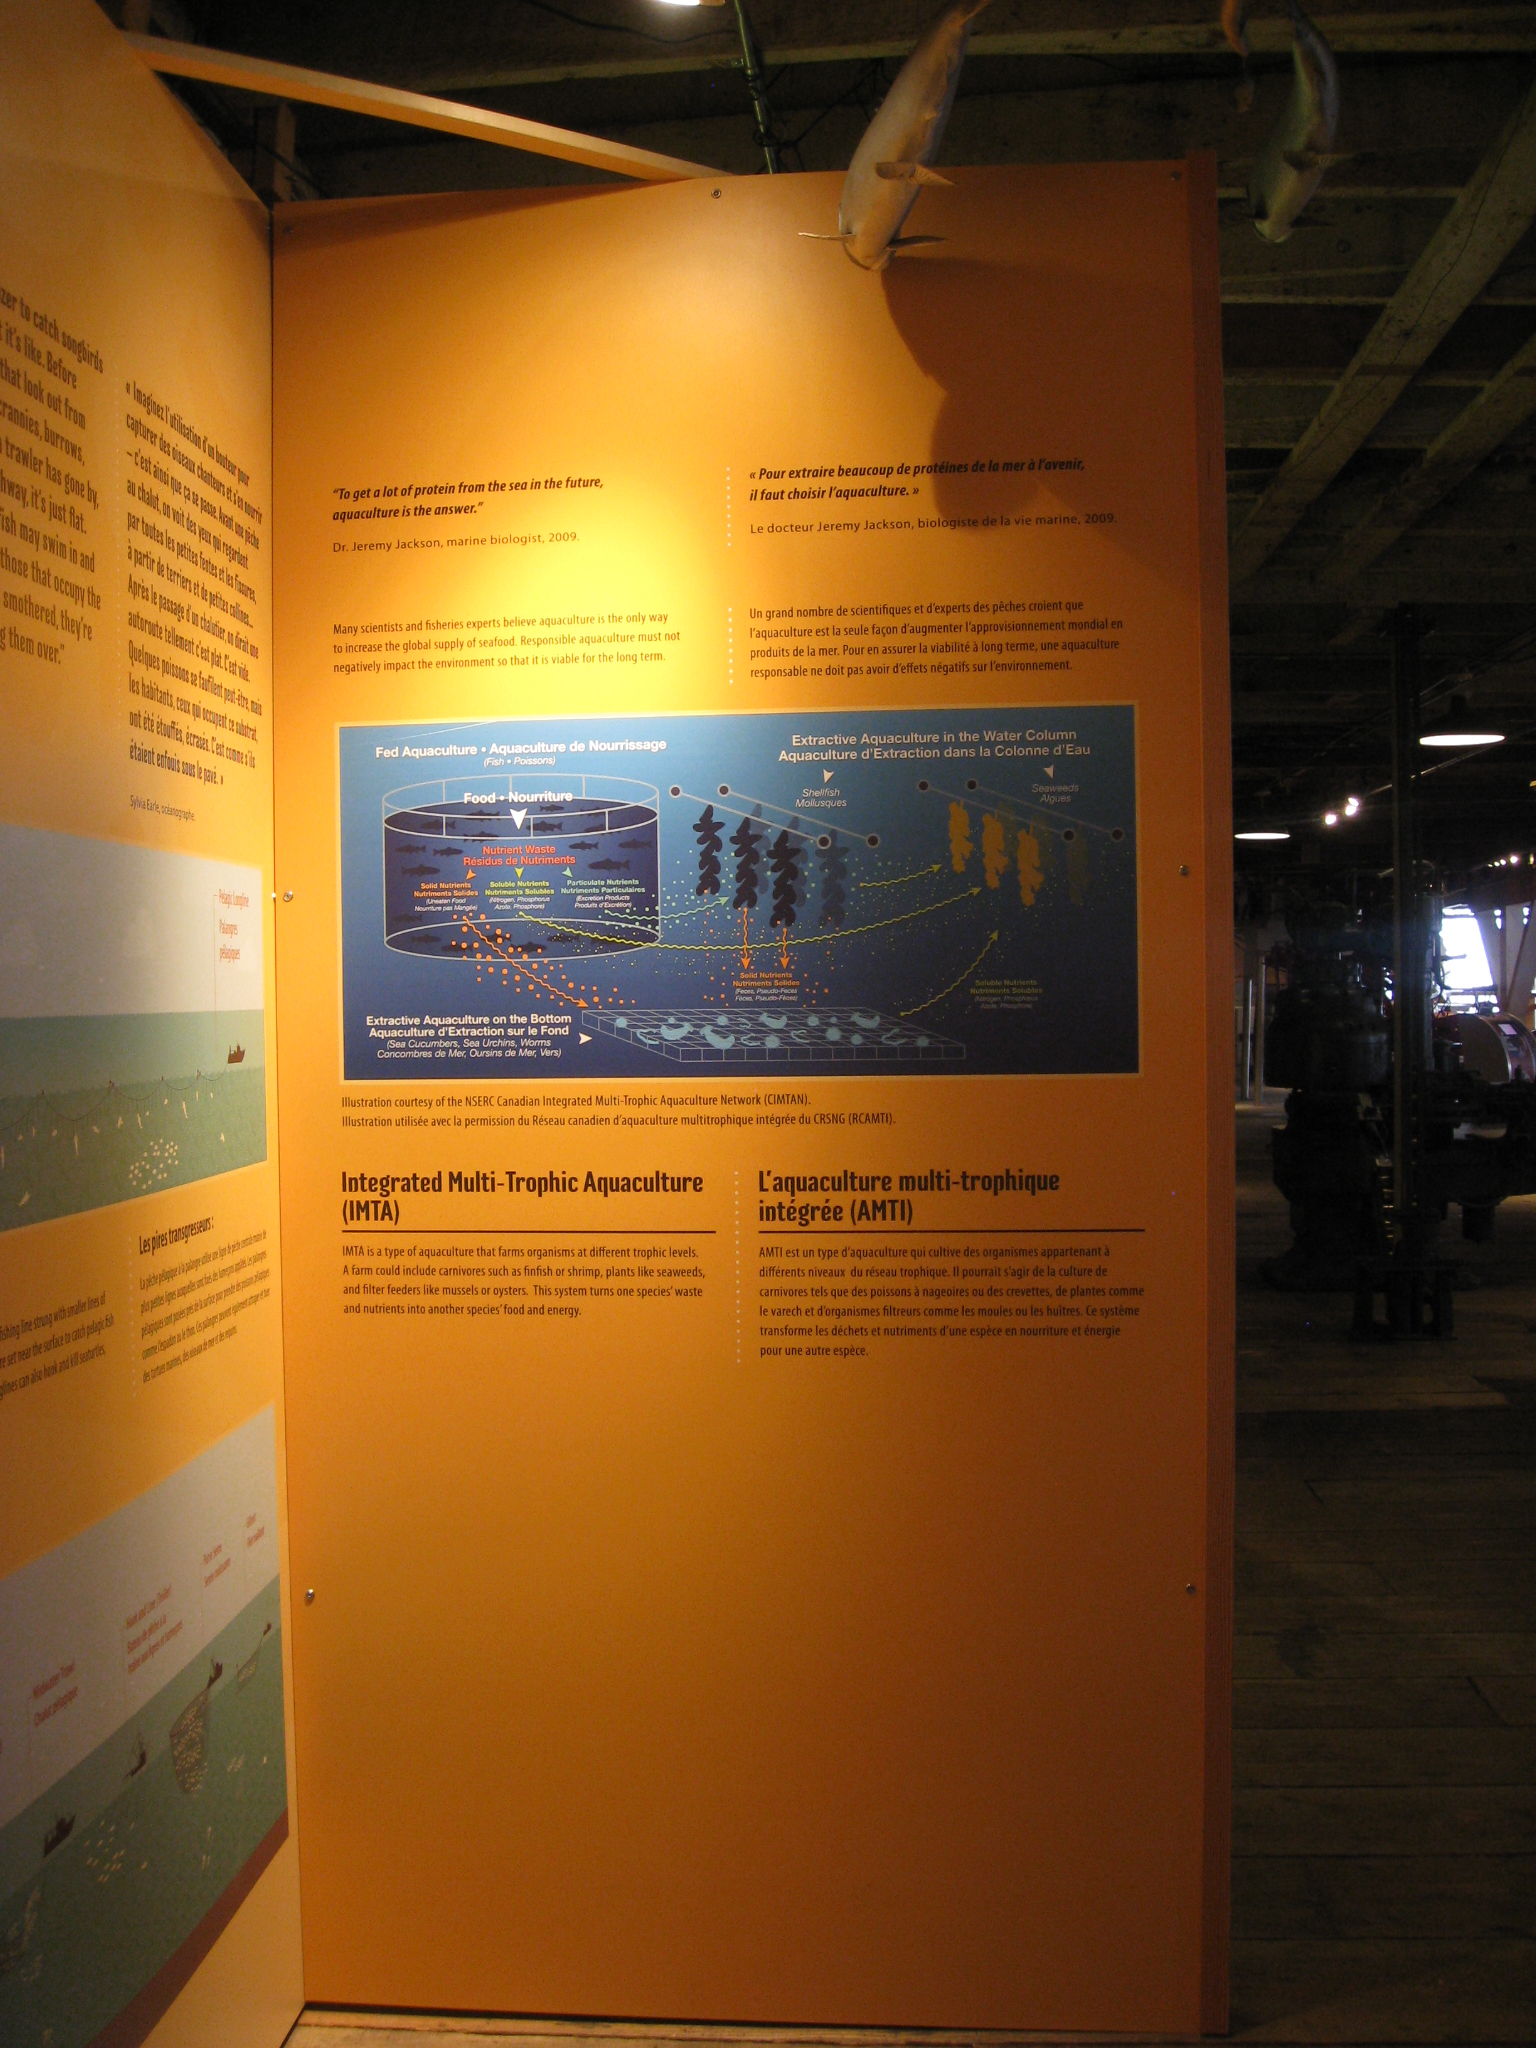 IMTA display at the temporary exhibit “Seafood for Thought” at the Gulf of Georgia Cannery in Richmond, British Columbia.